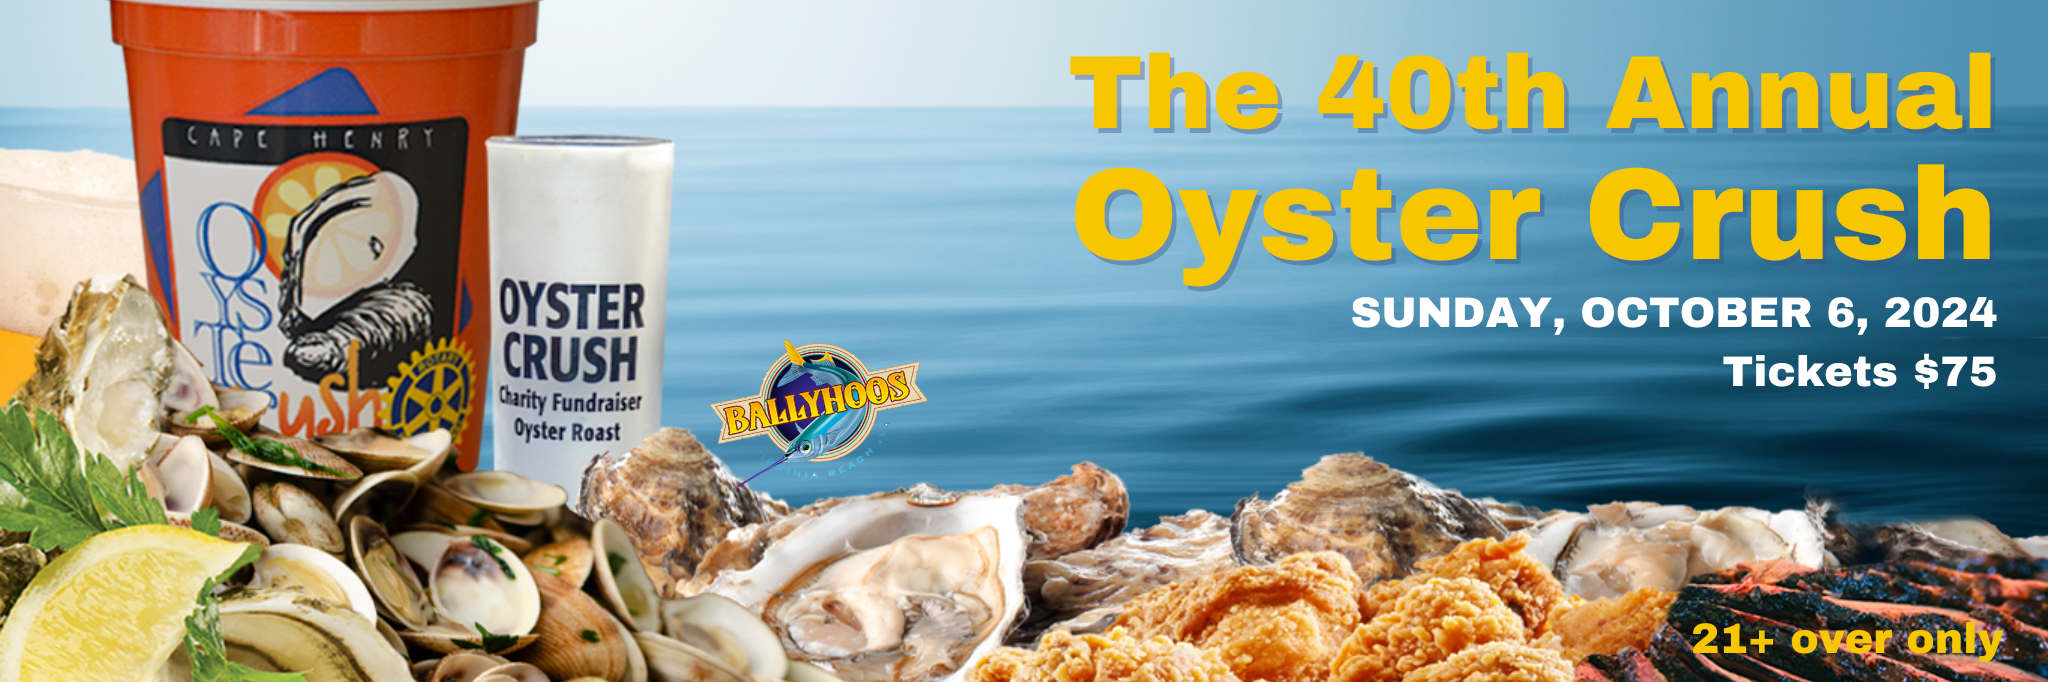 40th Annual Oyster Crush Banner